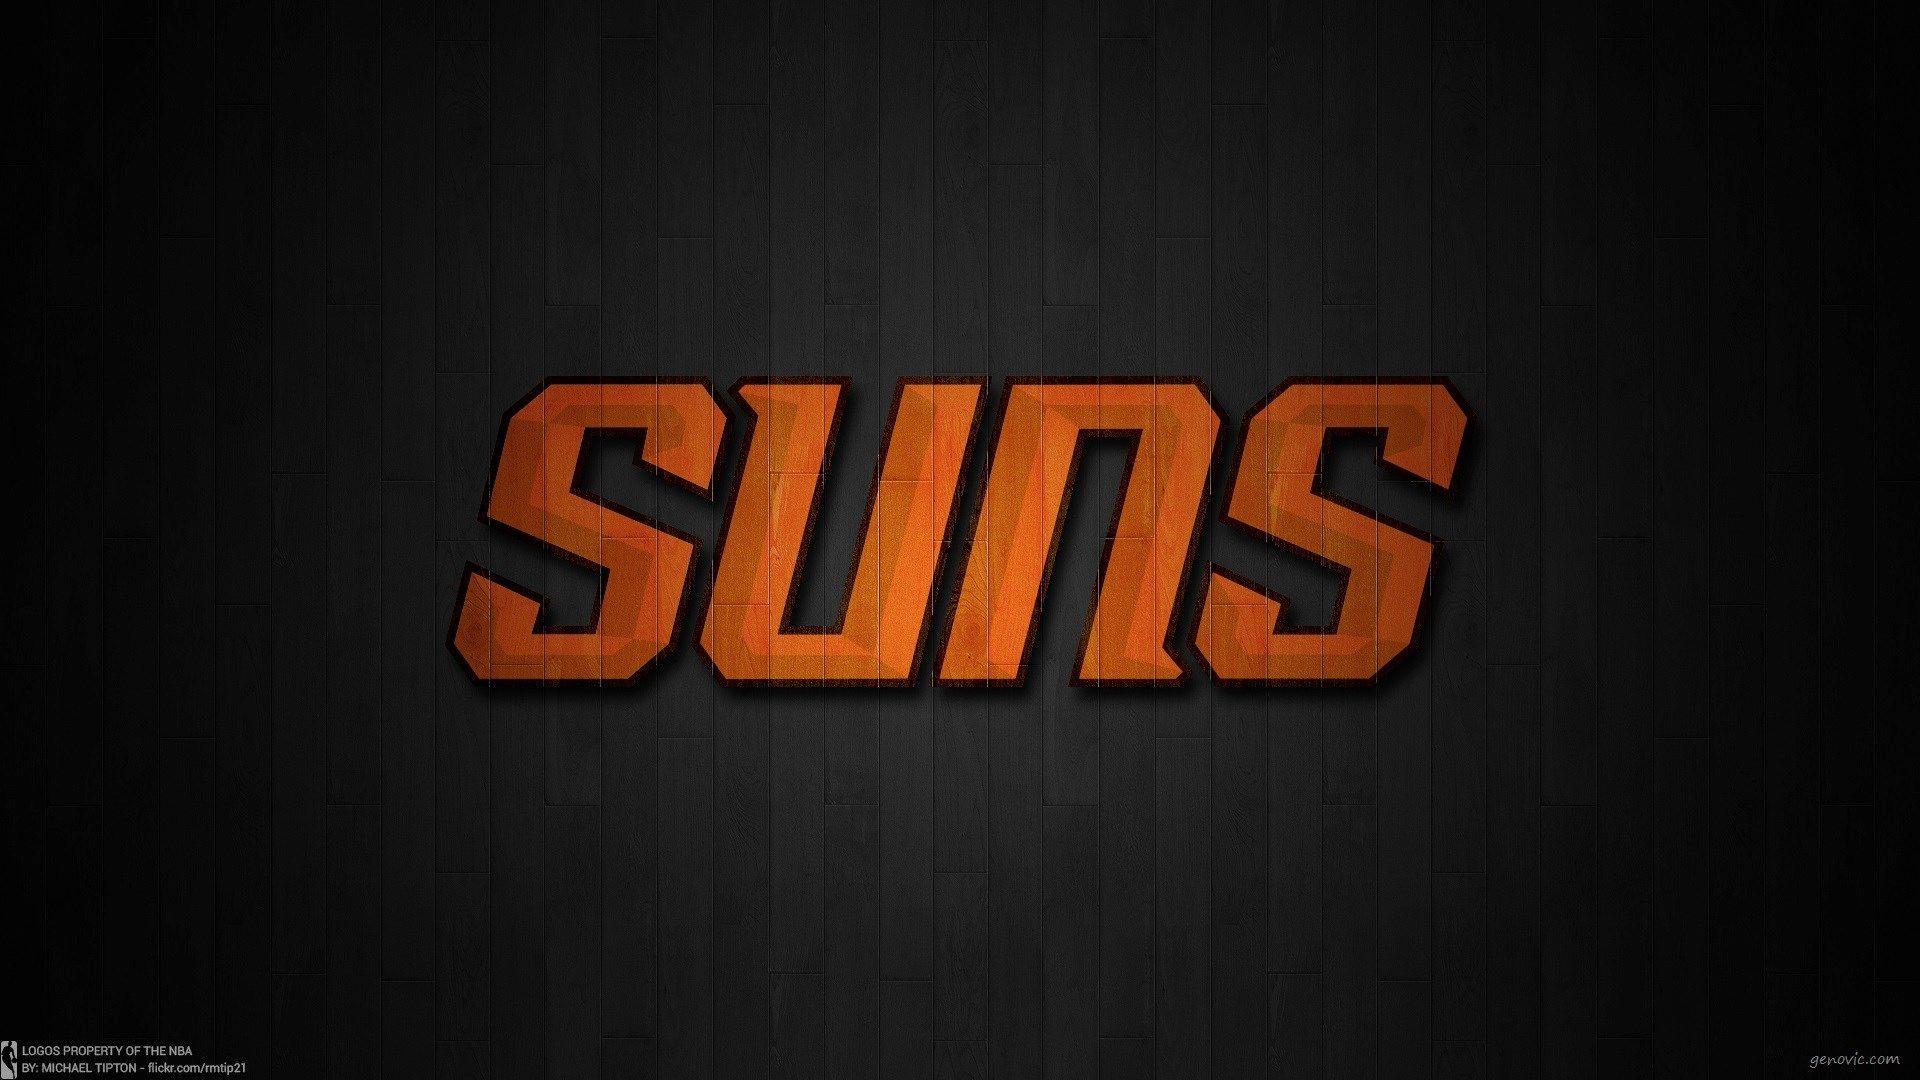 phoenix suns iPhone Wallpapers Free Download